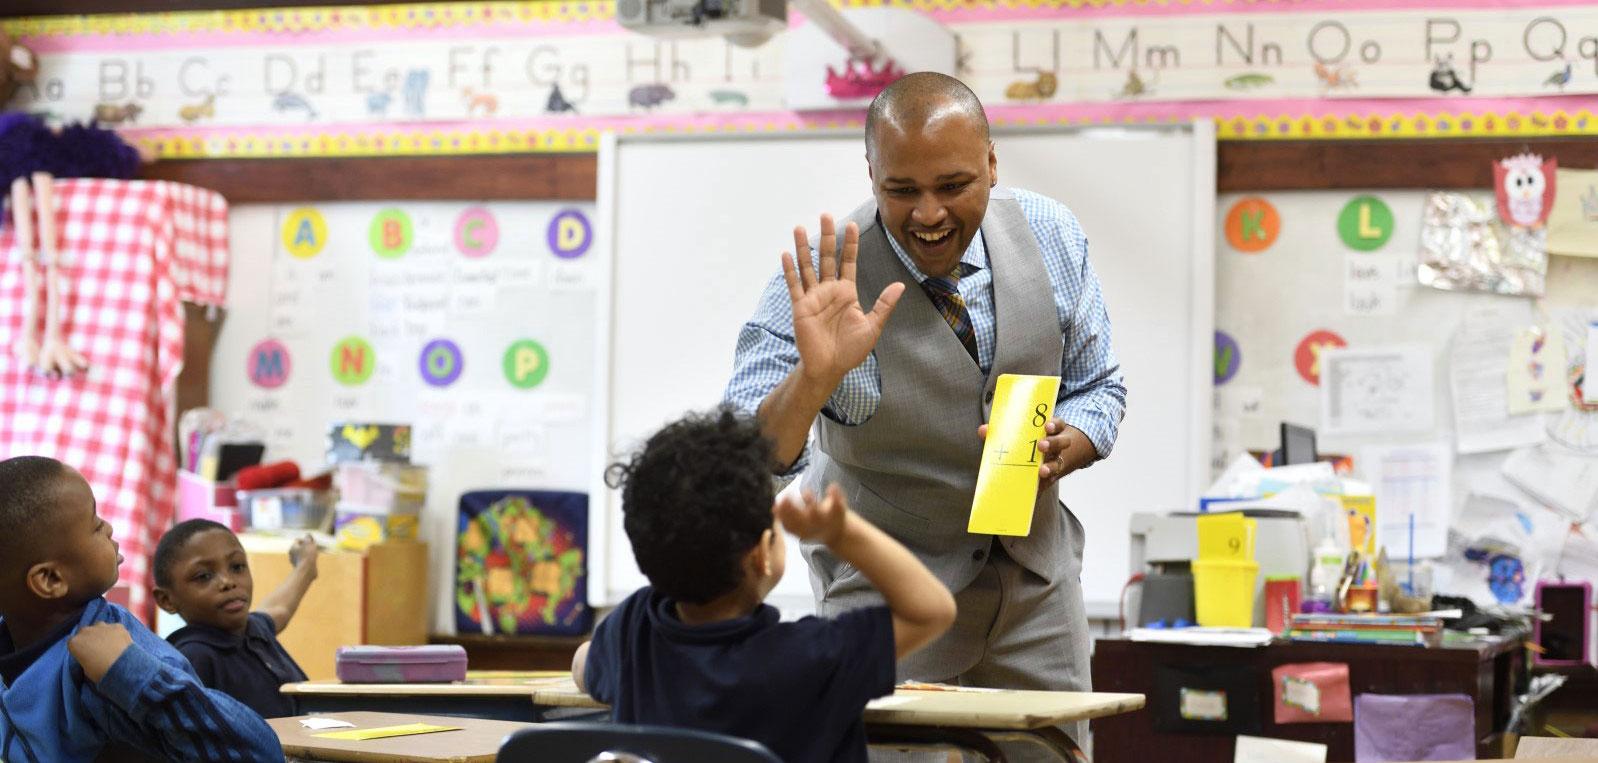 Male teacher high fiving a young student